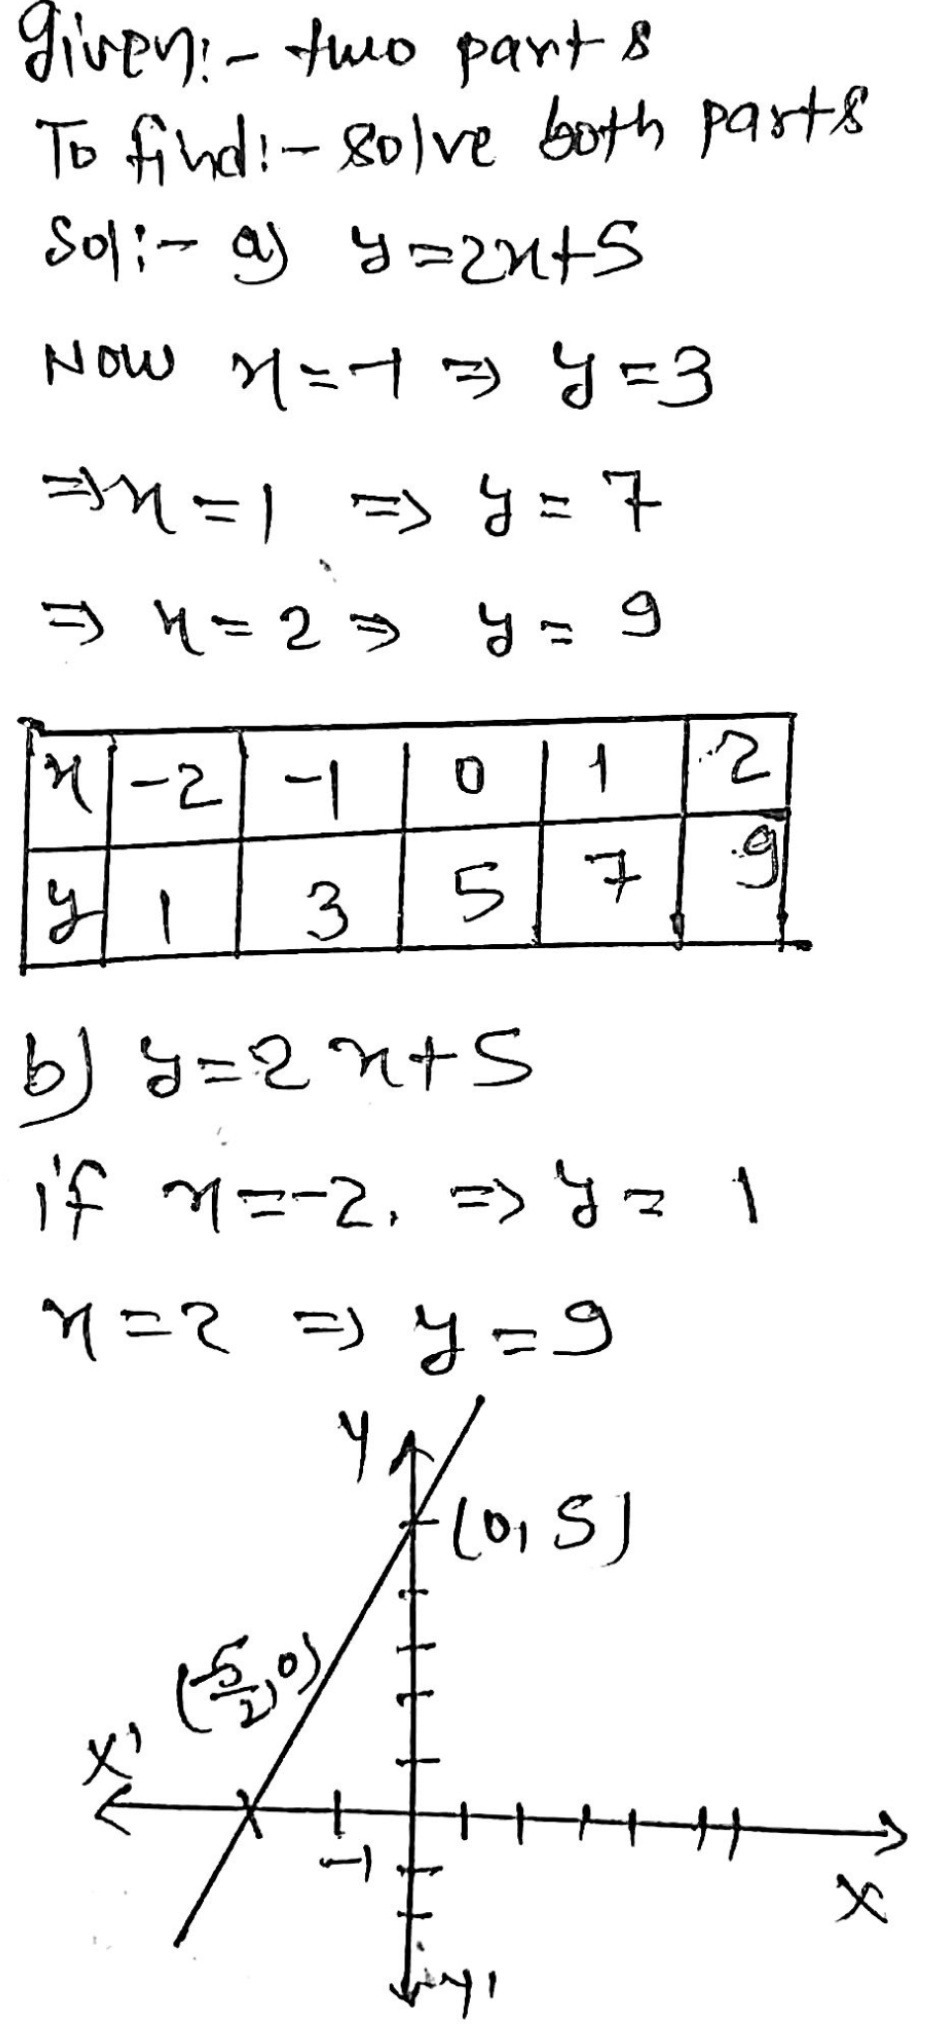 A Complete The Table Of Values For Y 2x 5 B On The Grid Draw The Graph Of Y 2x 5 For Values Of X From X 2 To X 2 Snapsolve